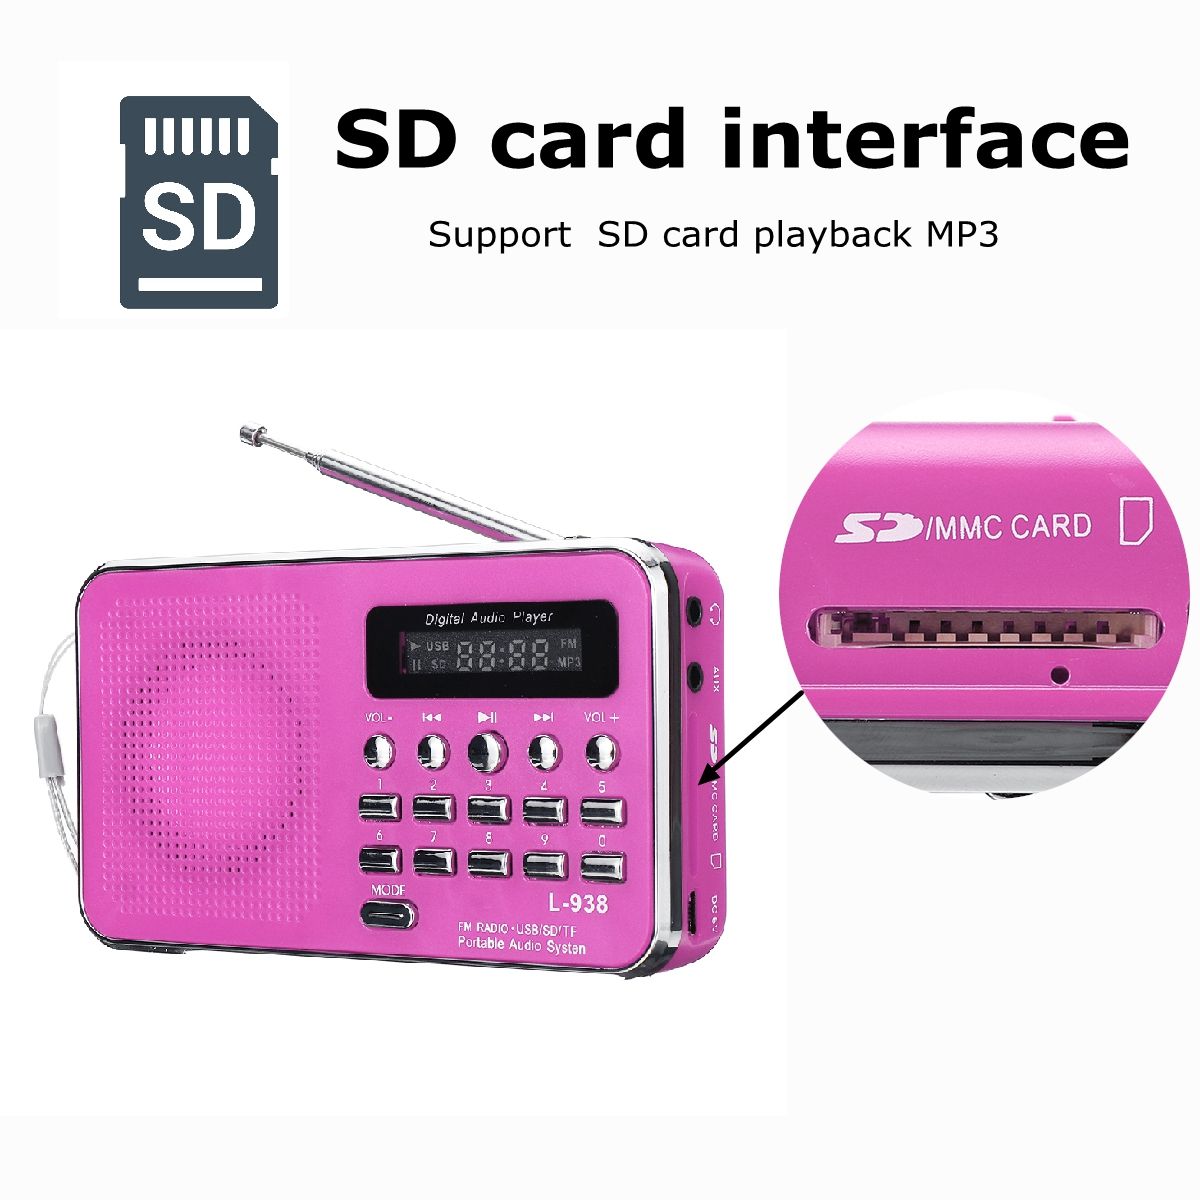 Portable-FM-875-108MHZ-42V-4Omega-Radio-TF-SD-Card-AUX-Loop-Play-Speaker-MP3-Music-Player-1525688